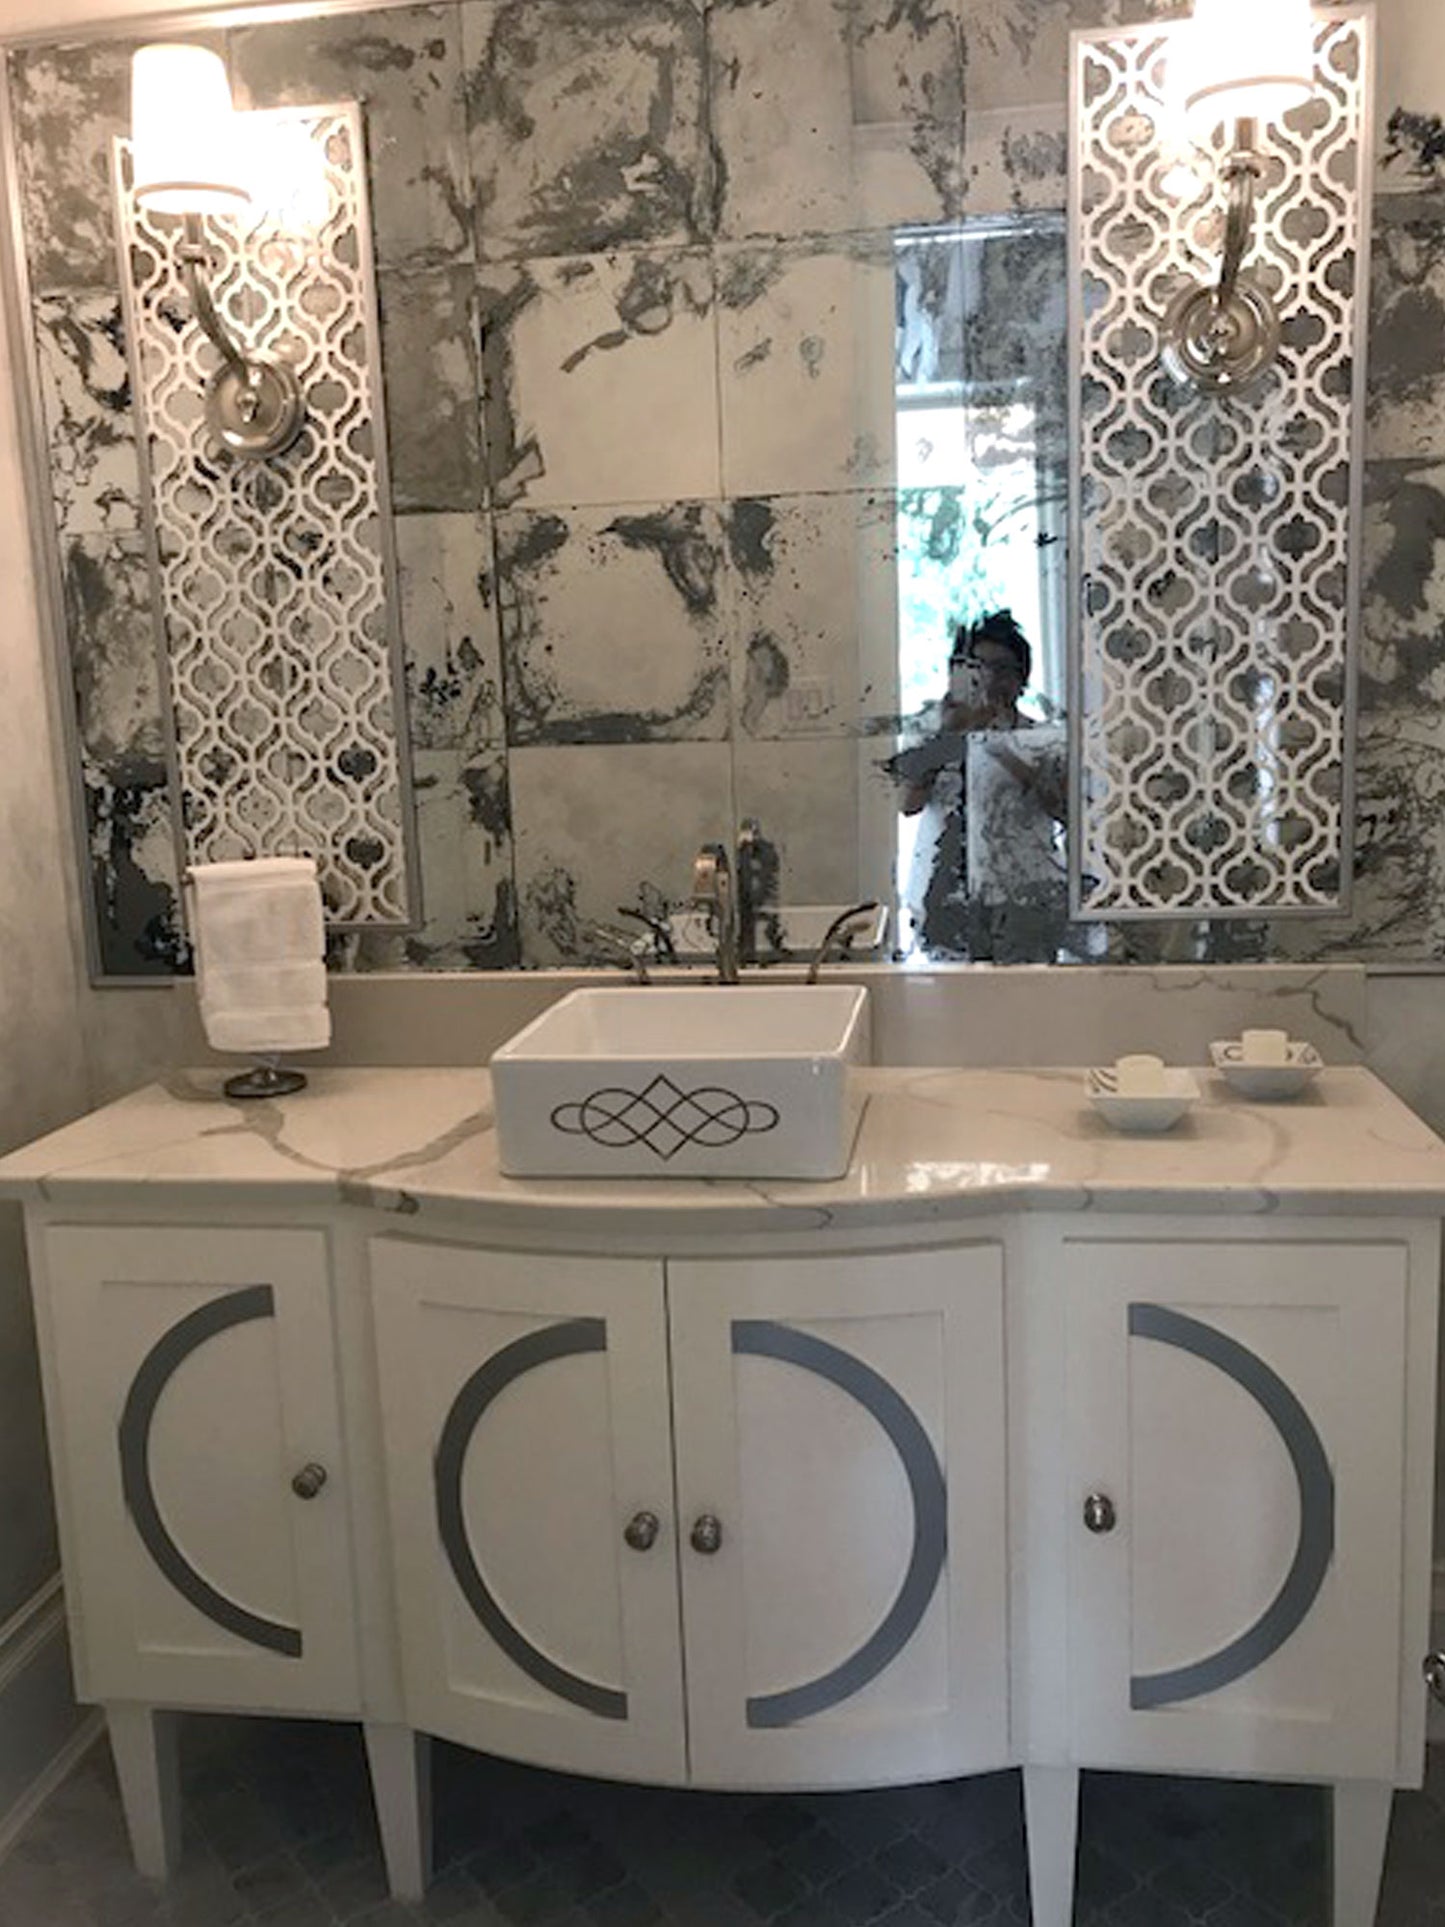 Eclectic bathroom with mirrors and vessel sink painted with double swirl design